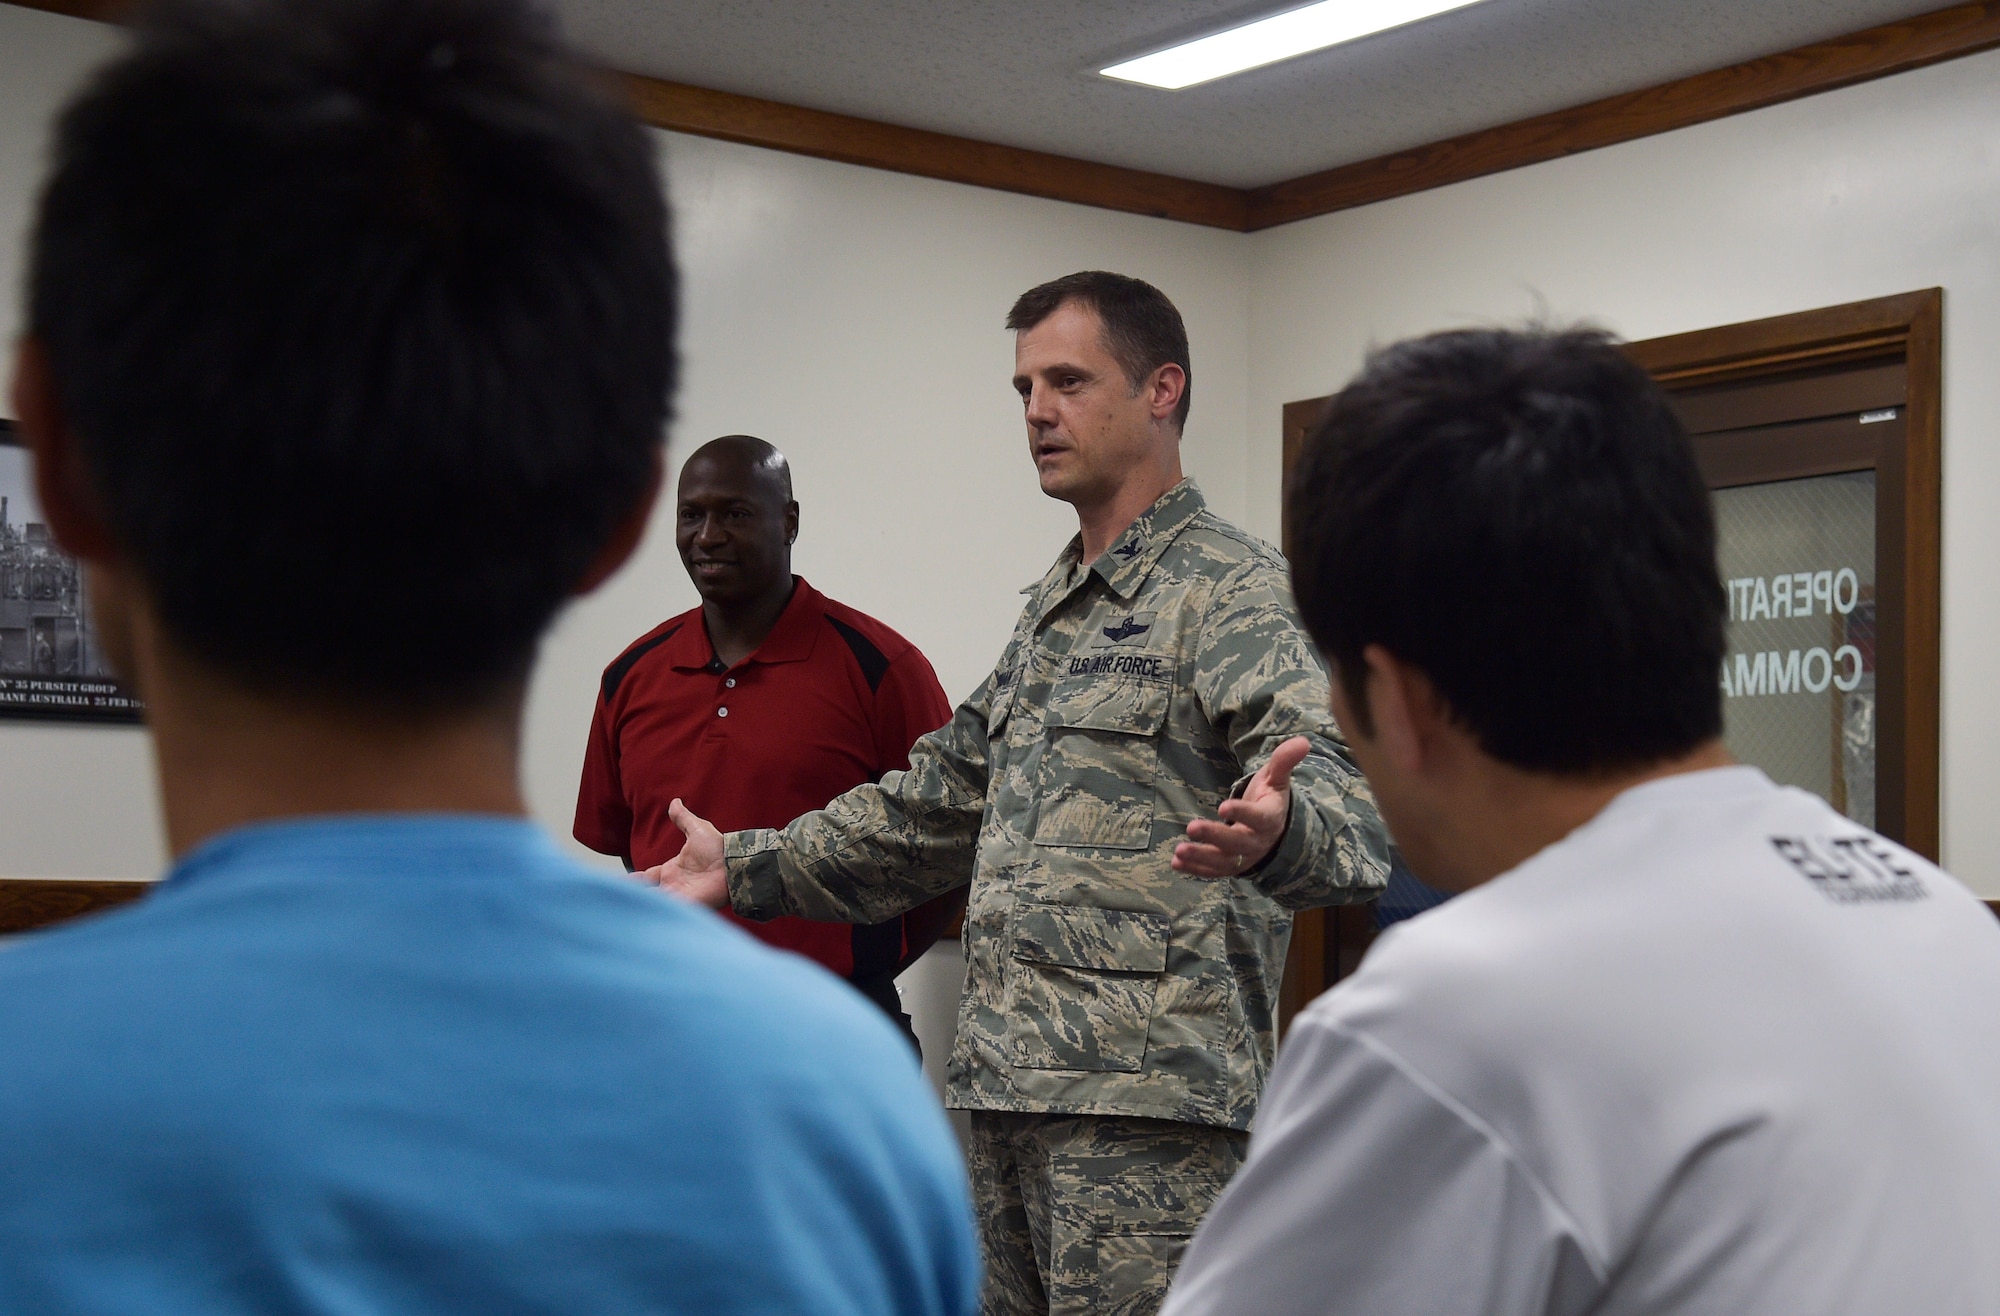 U.S. Air Force Col. William Bowman, the commander of the 35th Operations Group, speaks with members of the Japan Railway East Akita Peckers basketball team at Misawa Air Base, Japan, June 17, 2016. As part of a Misawa AB tour and basketball camp, the Japanese team was briefed on the purpose and mission of the 35th Fighter Wing. The goal of the event was to promote bilateral relations and help basketball players prepare for the upcoming season. (U.S. Air Force photo by Senior Airman Deana Heitzman)